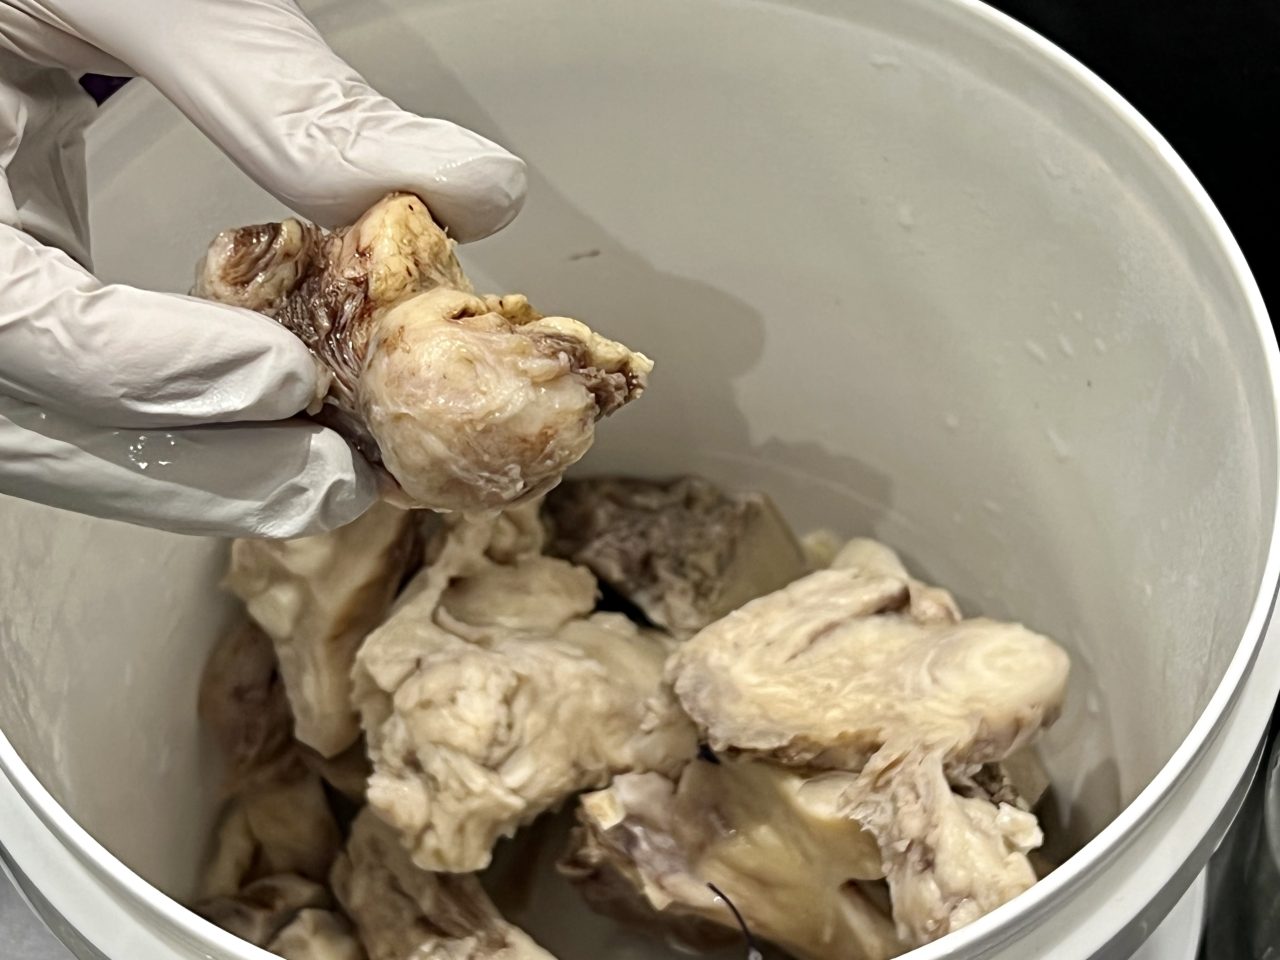 Preserving a human organ: The tumour from the jar held over the bucket of uterus post hysterectomy.